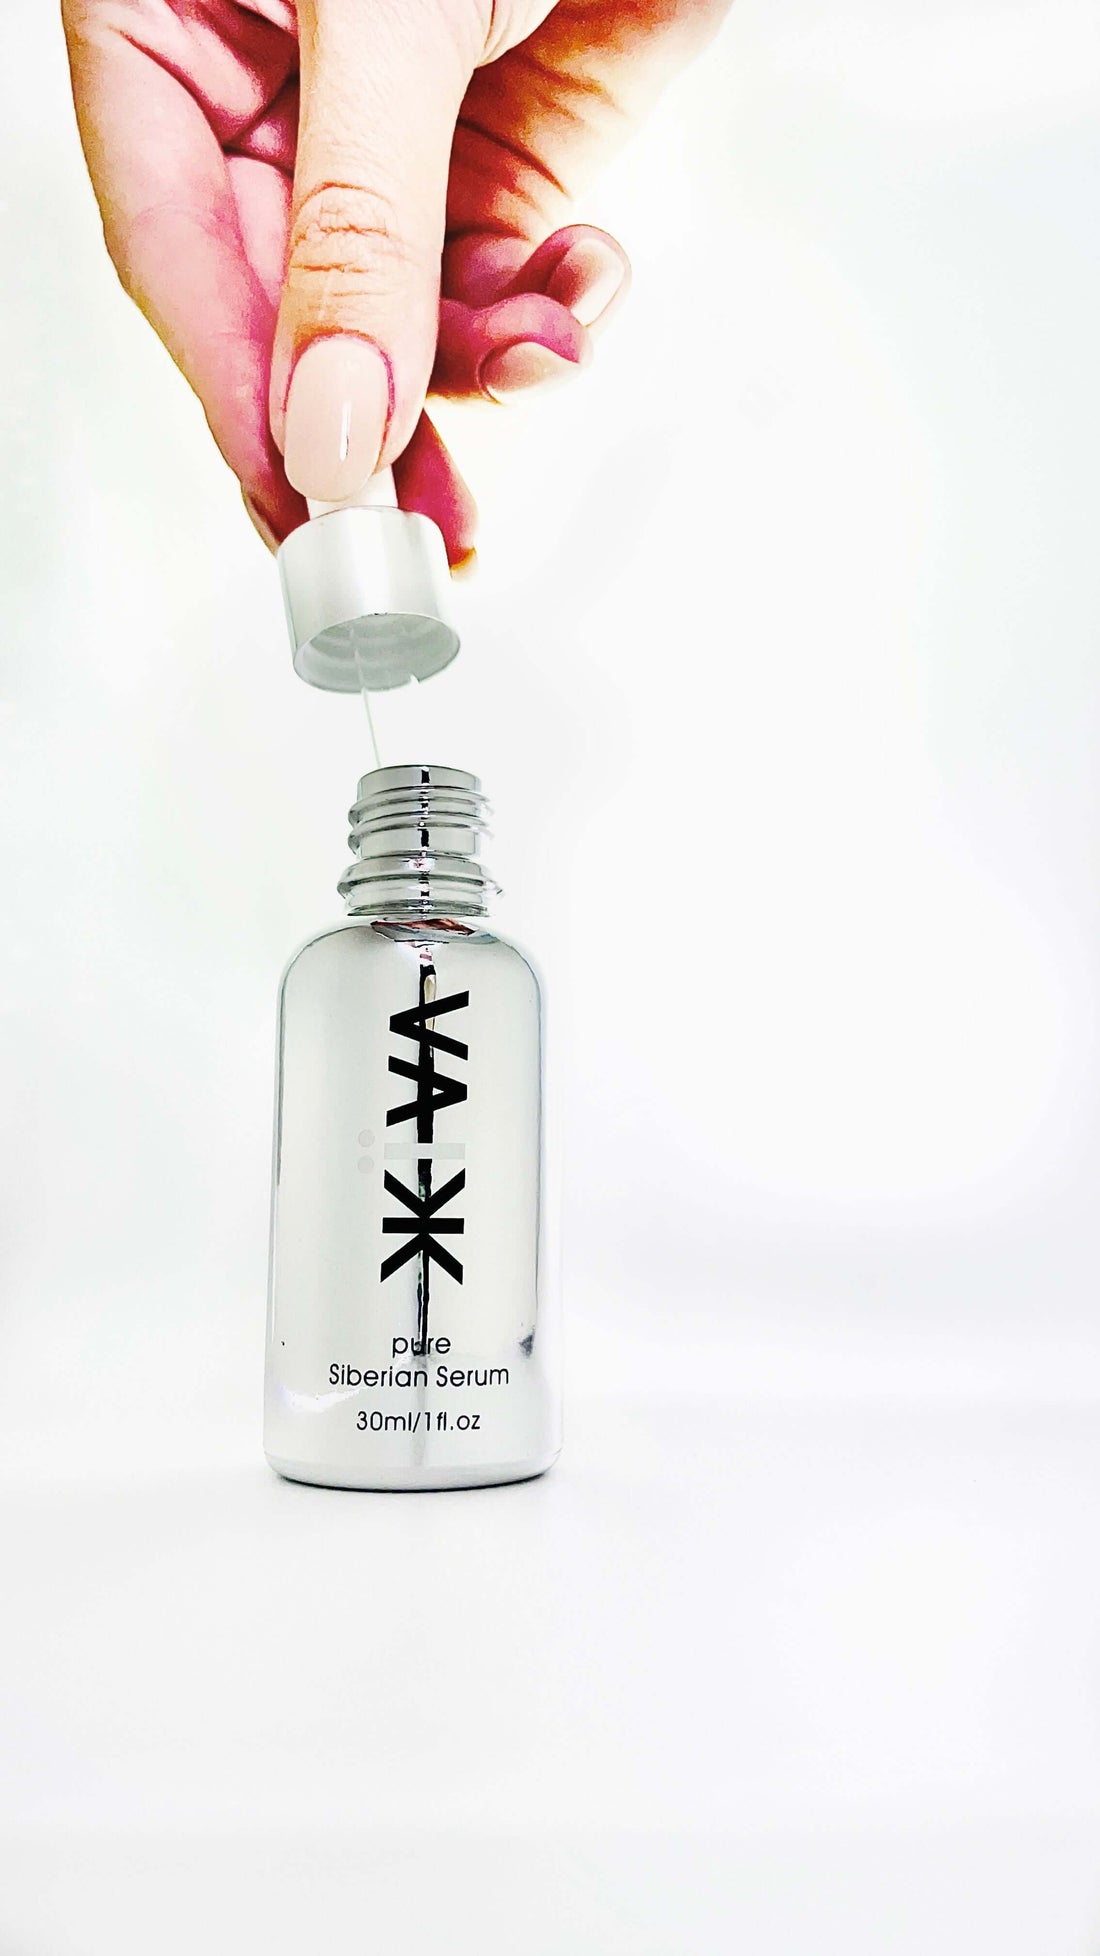 Zhiiva is a pure, “chemistry-free”, sustainable, and 100% natural skincare serum from the heart of Siberian Taiga forest.